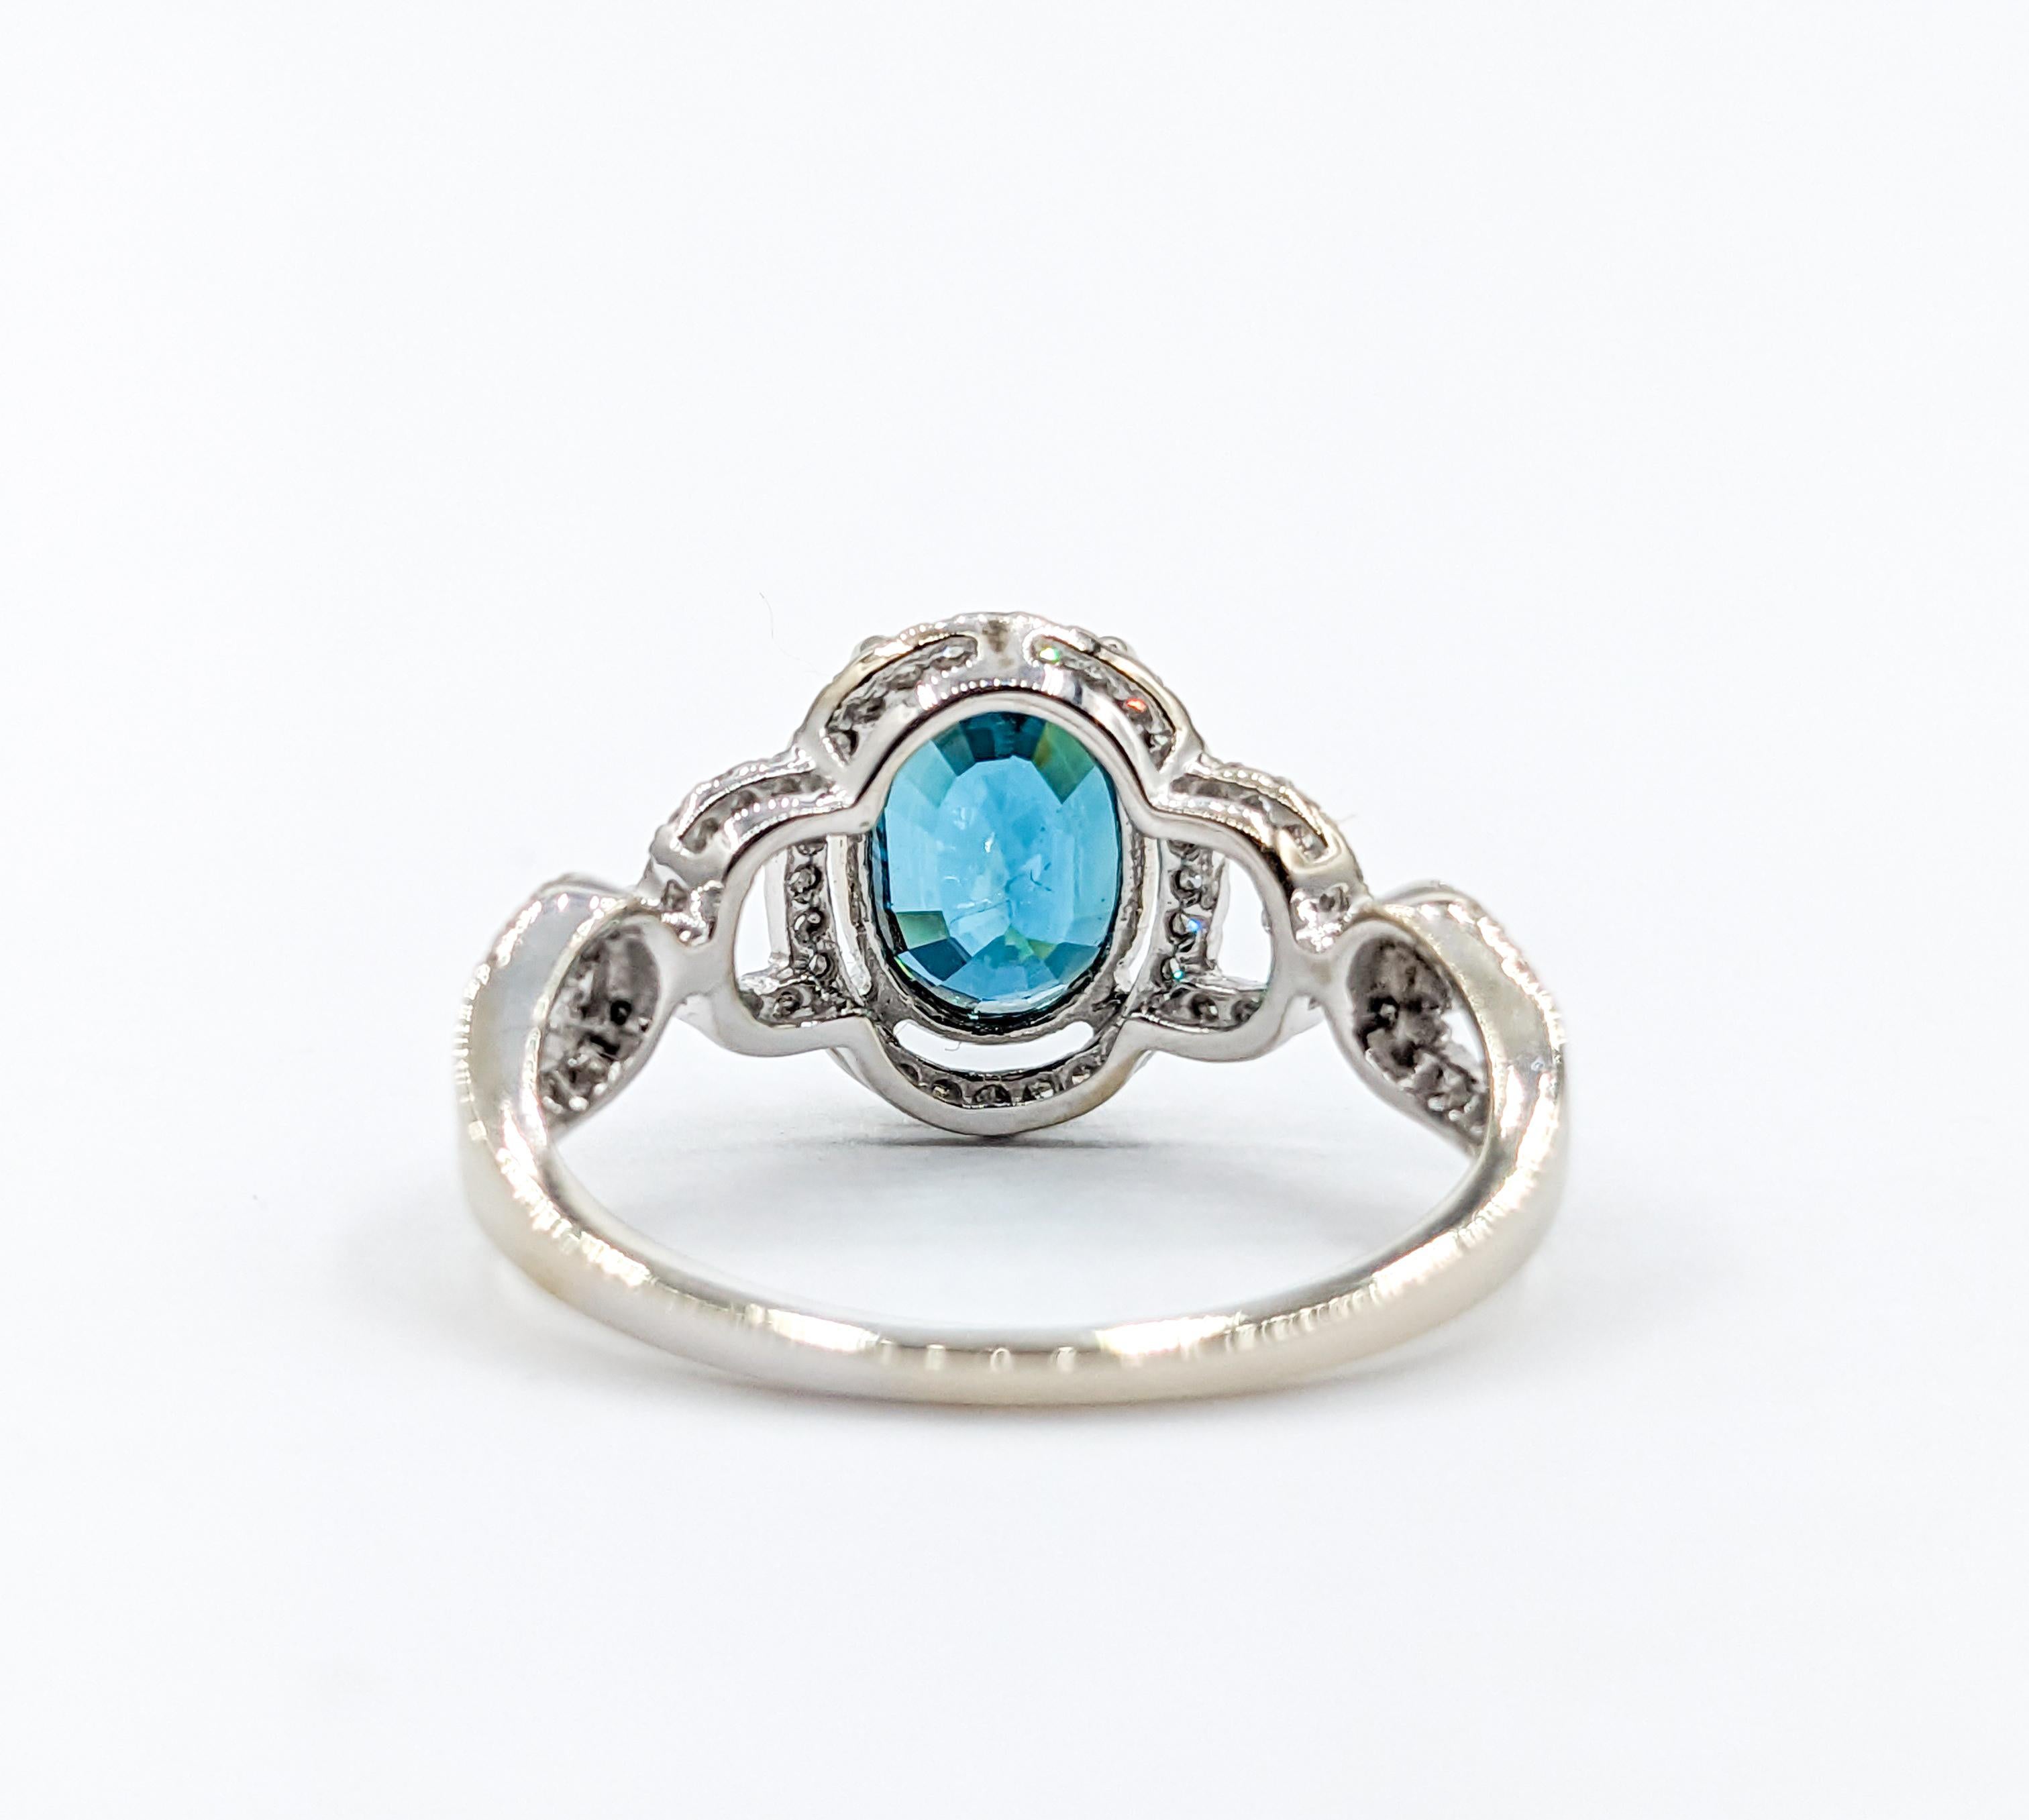 2.53ct Blue Zircon & Diamond Fashion Ring In Excellent Condition For Sale In Bloomington, MN